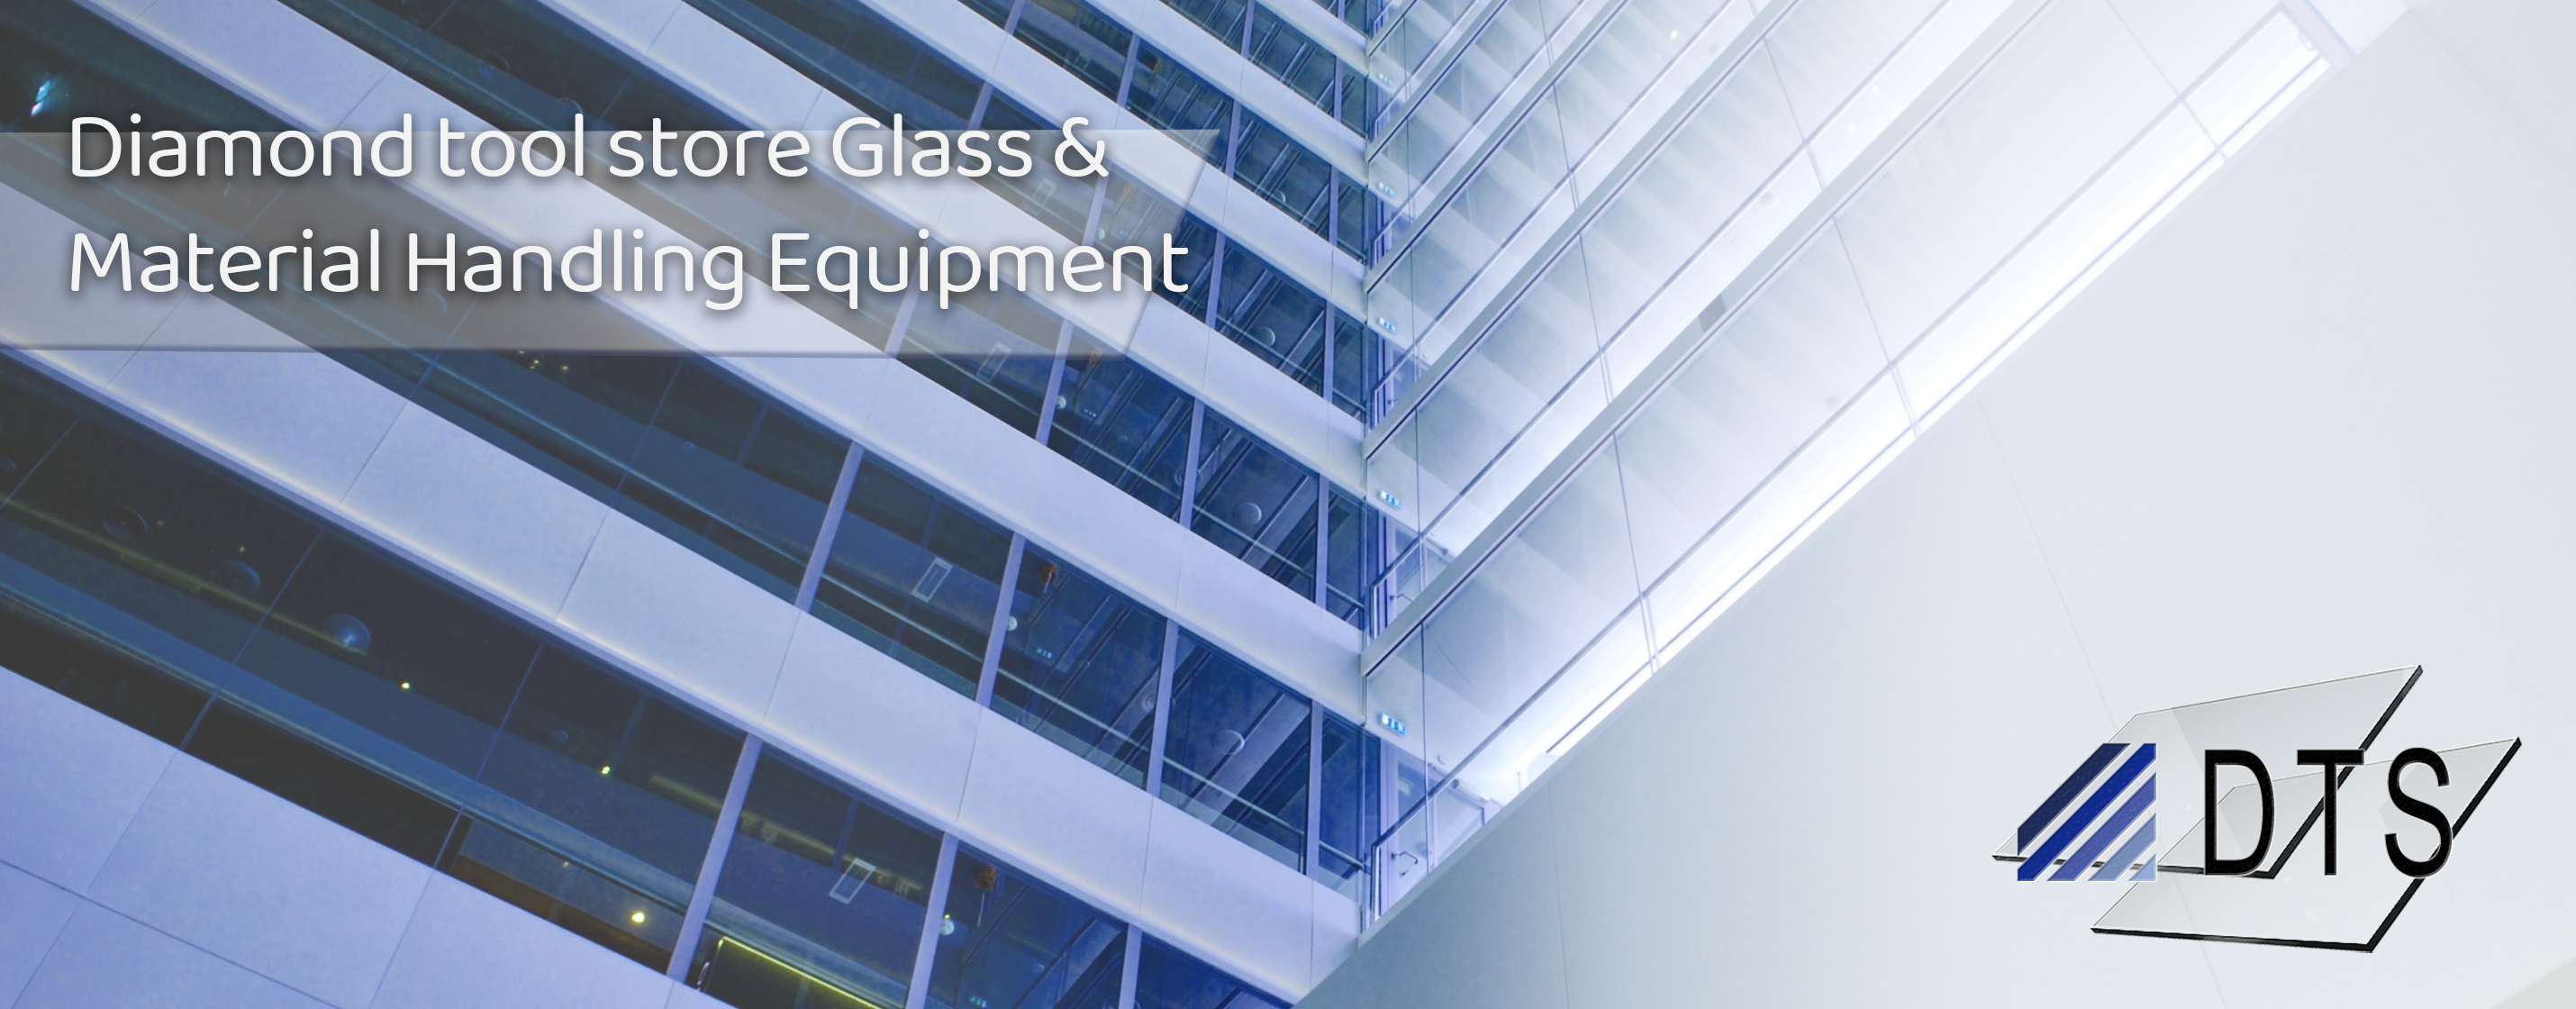 DTS_Glass_Material_Handling_Equipment_Mobile_60146ab8-9d6f-43b1-91be-1e731c73eff6.png